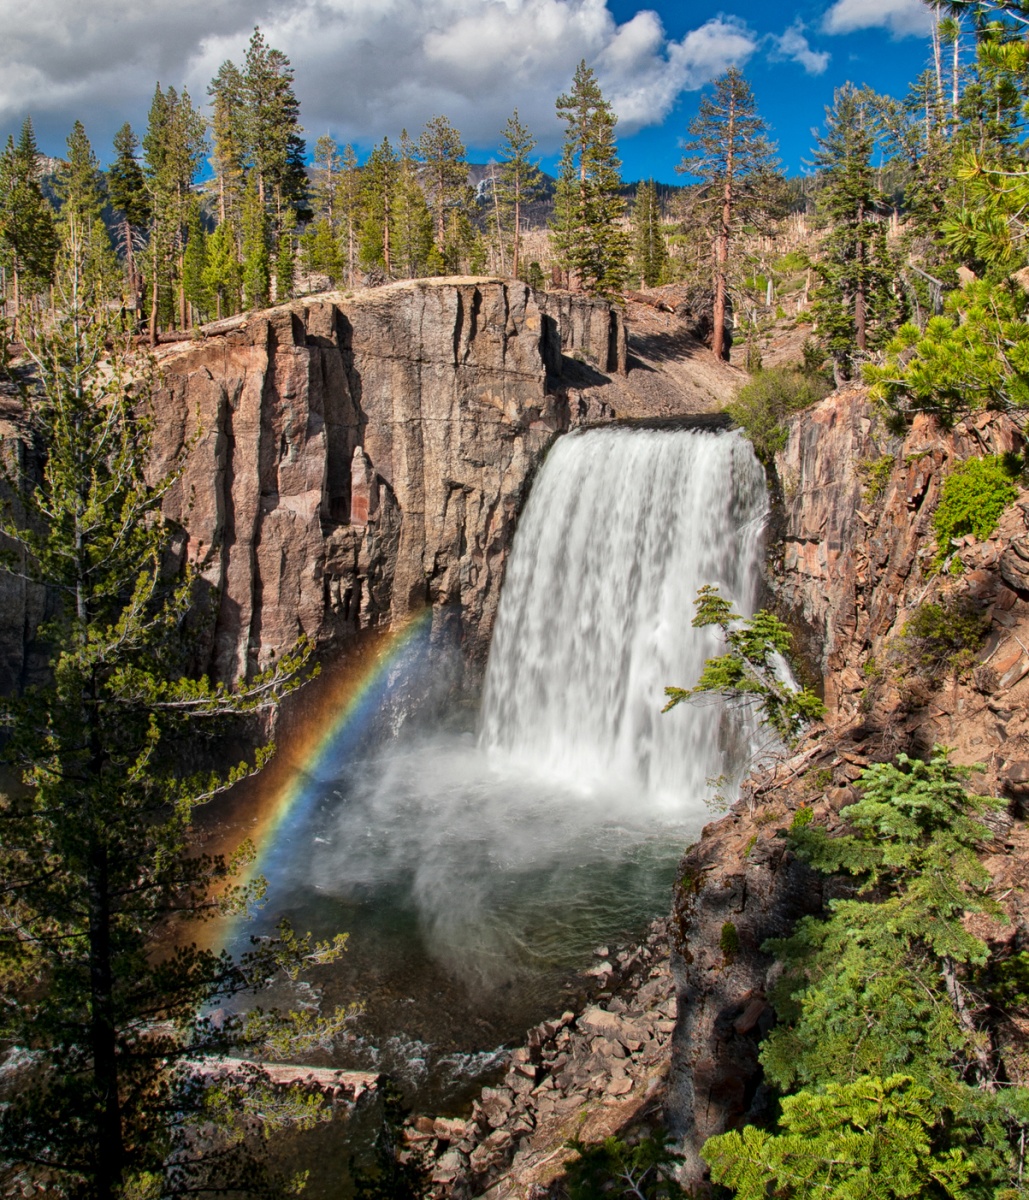 A waterfall flows from high rocky cliffs surrounded by bright green trees. A blue slightly cloudy sky shines over the scene, and a small rainbow frames the water.